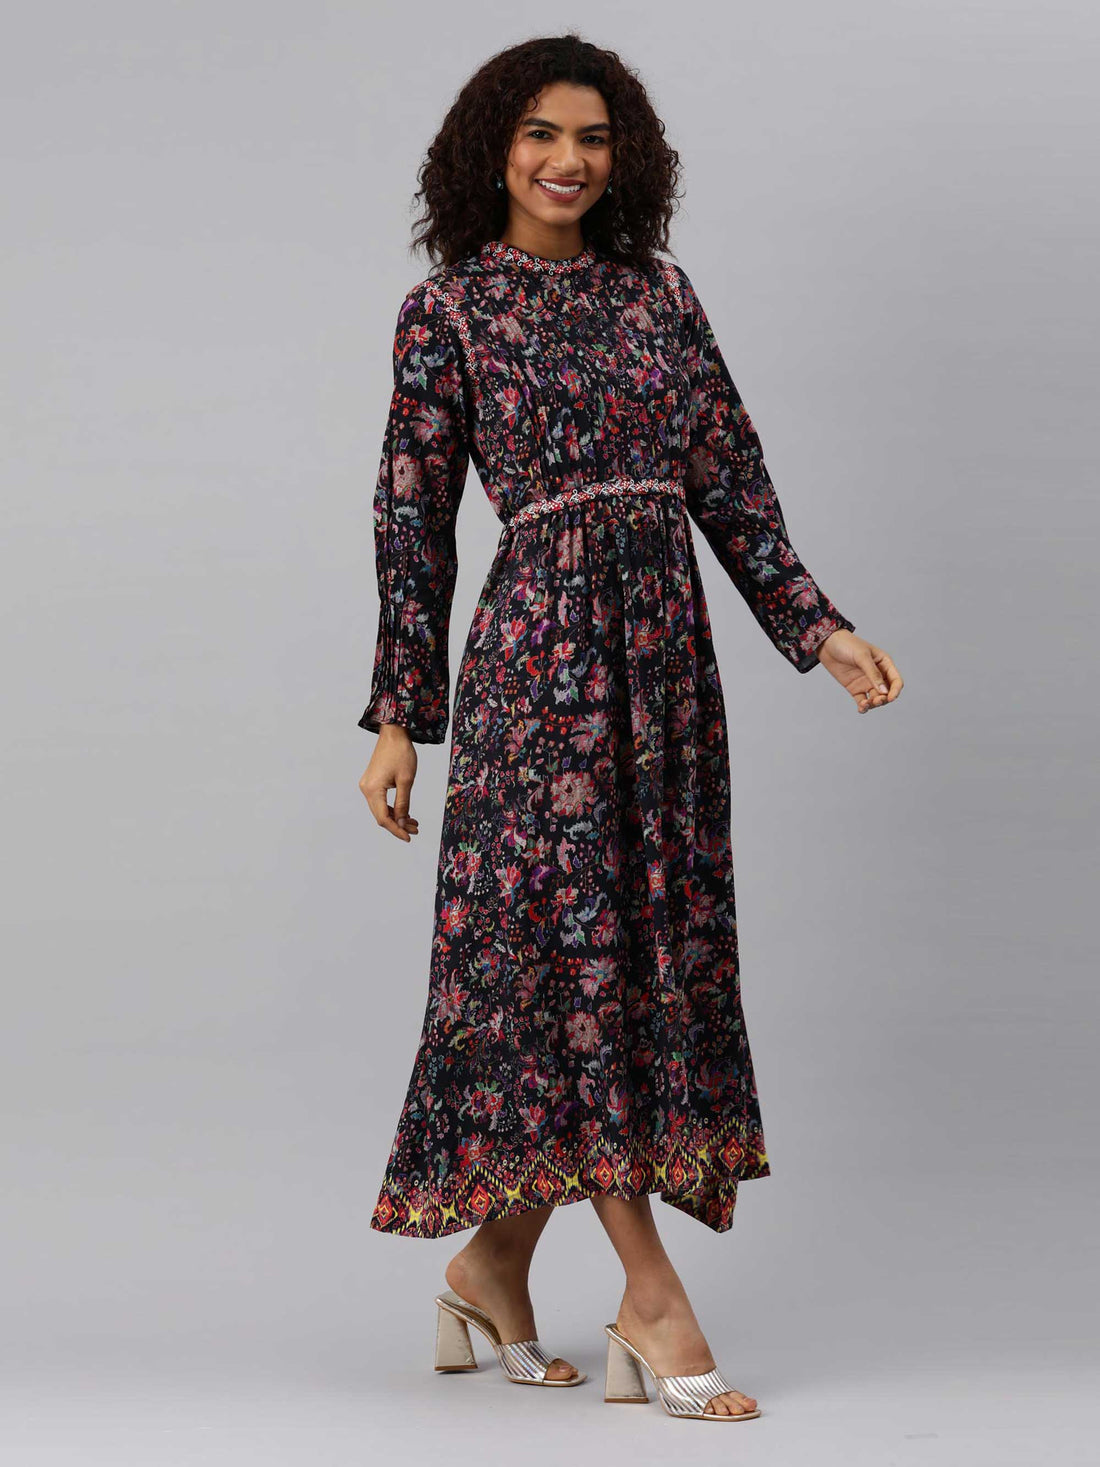 Floral print Aline dress with an embroidered belt